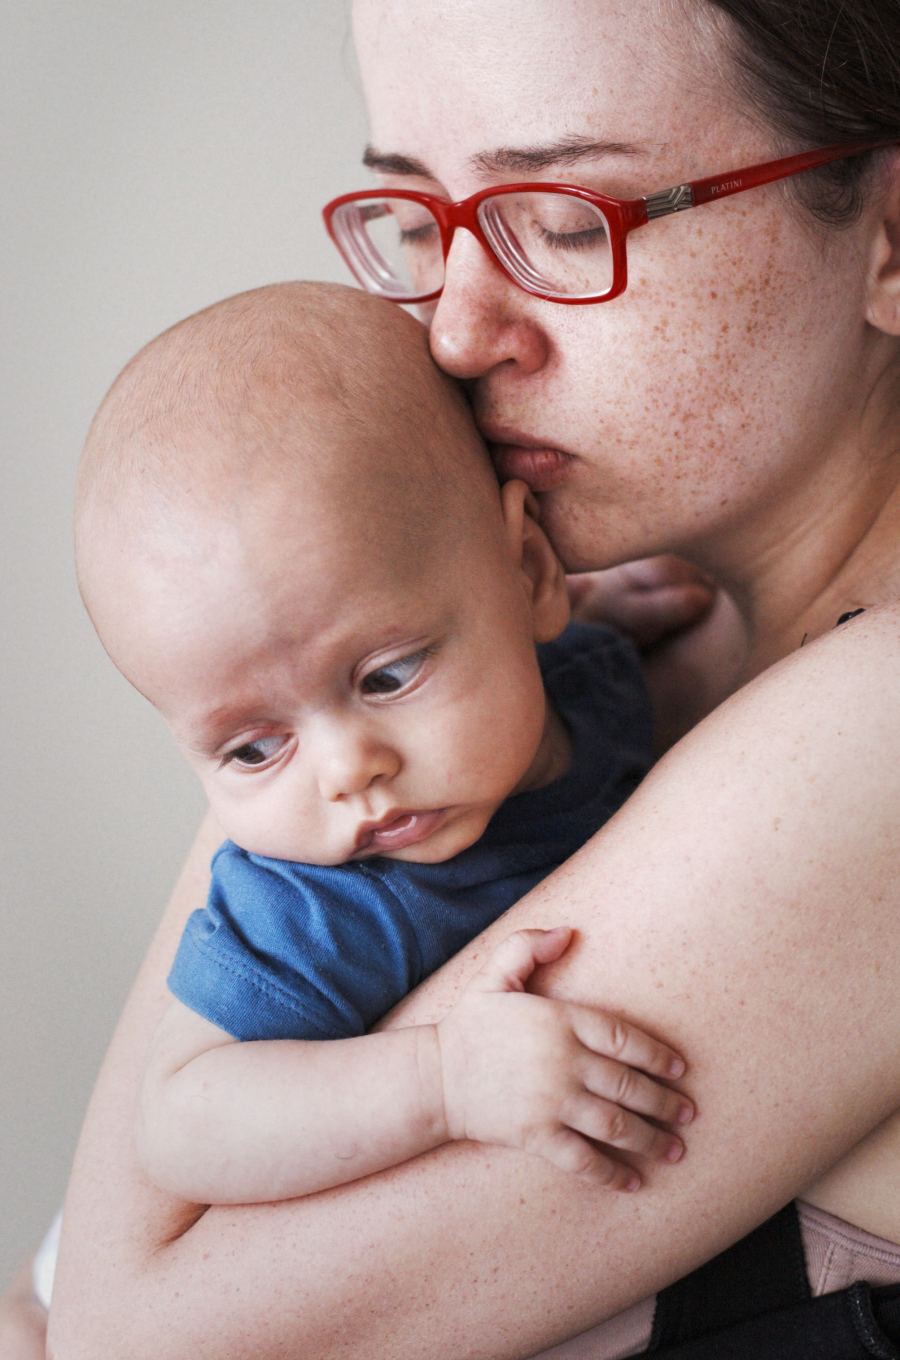 Image for Article: Separation with a baby... what happens now?